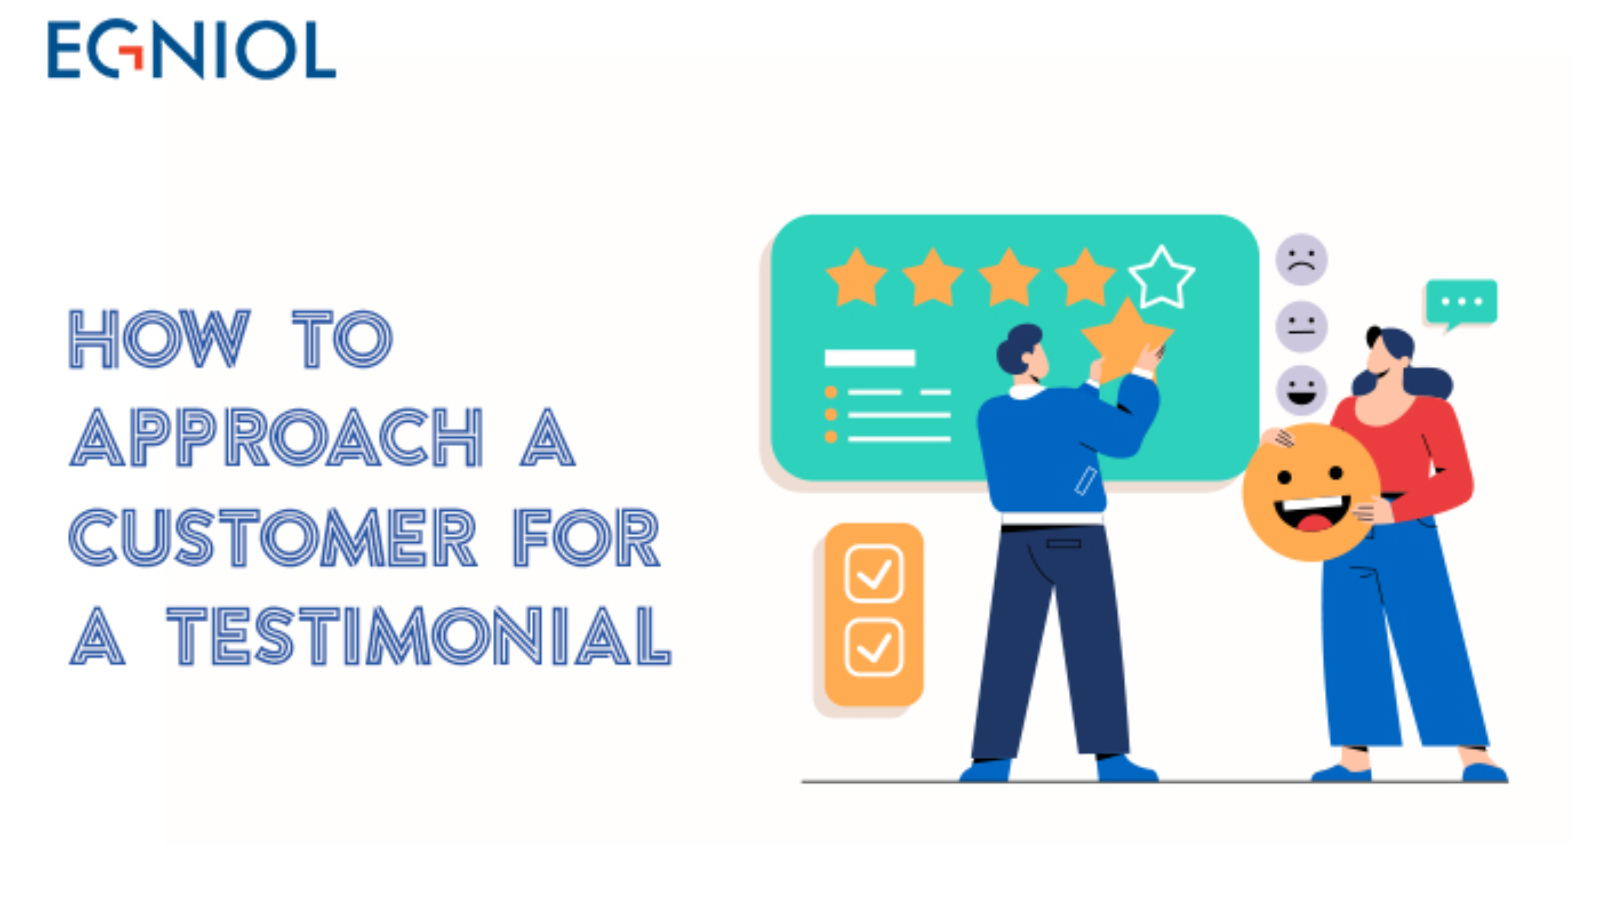 HOW TO APPROACH A CUSTOMER FOR A TESTIMONIAL - By Egniol